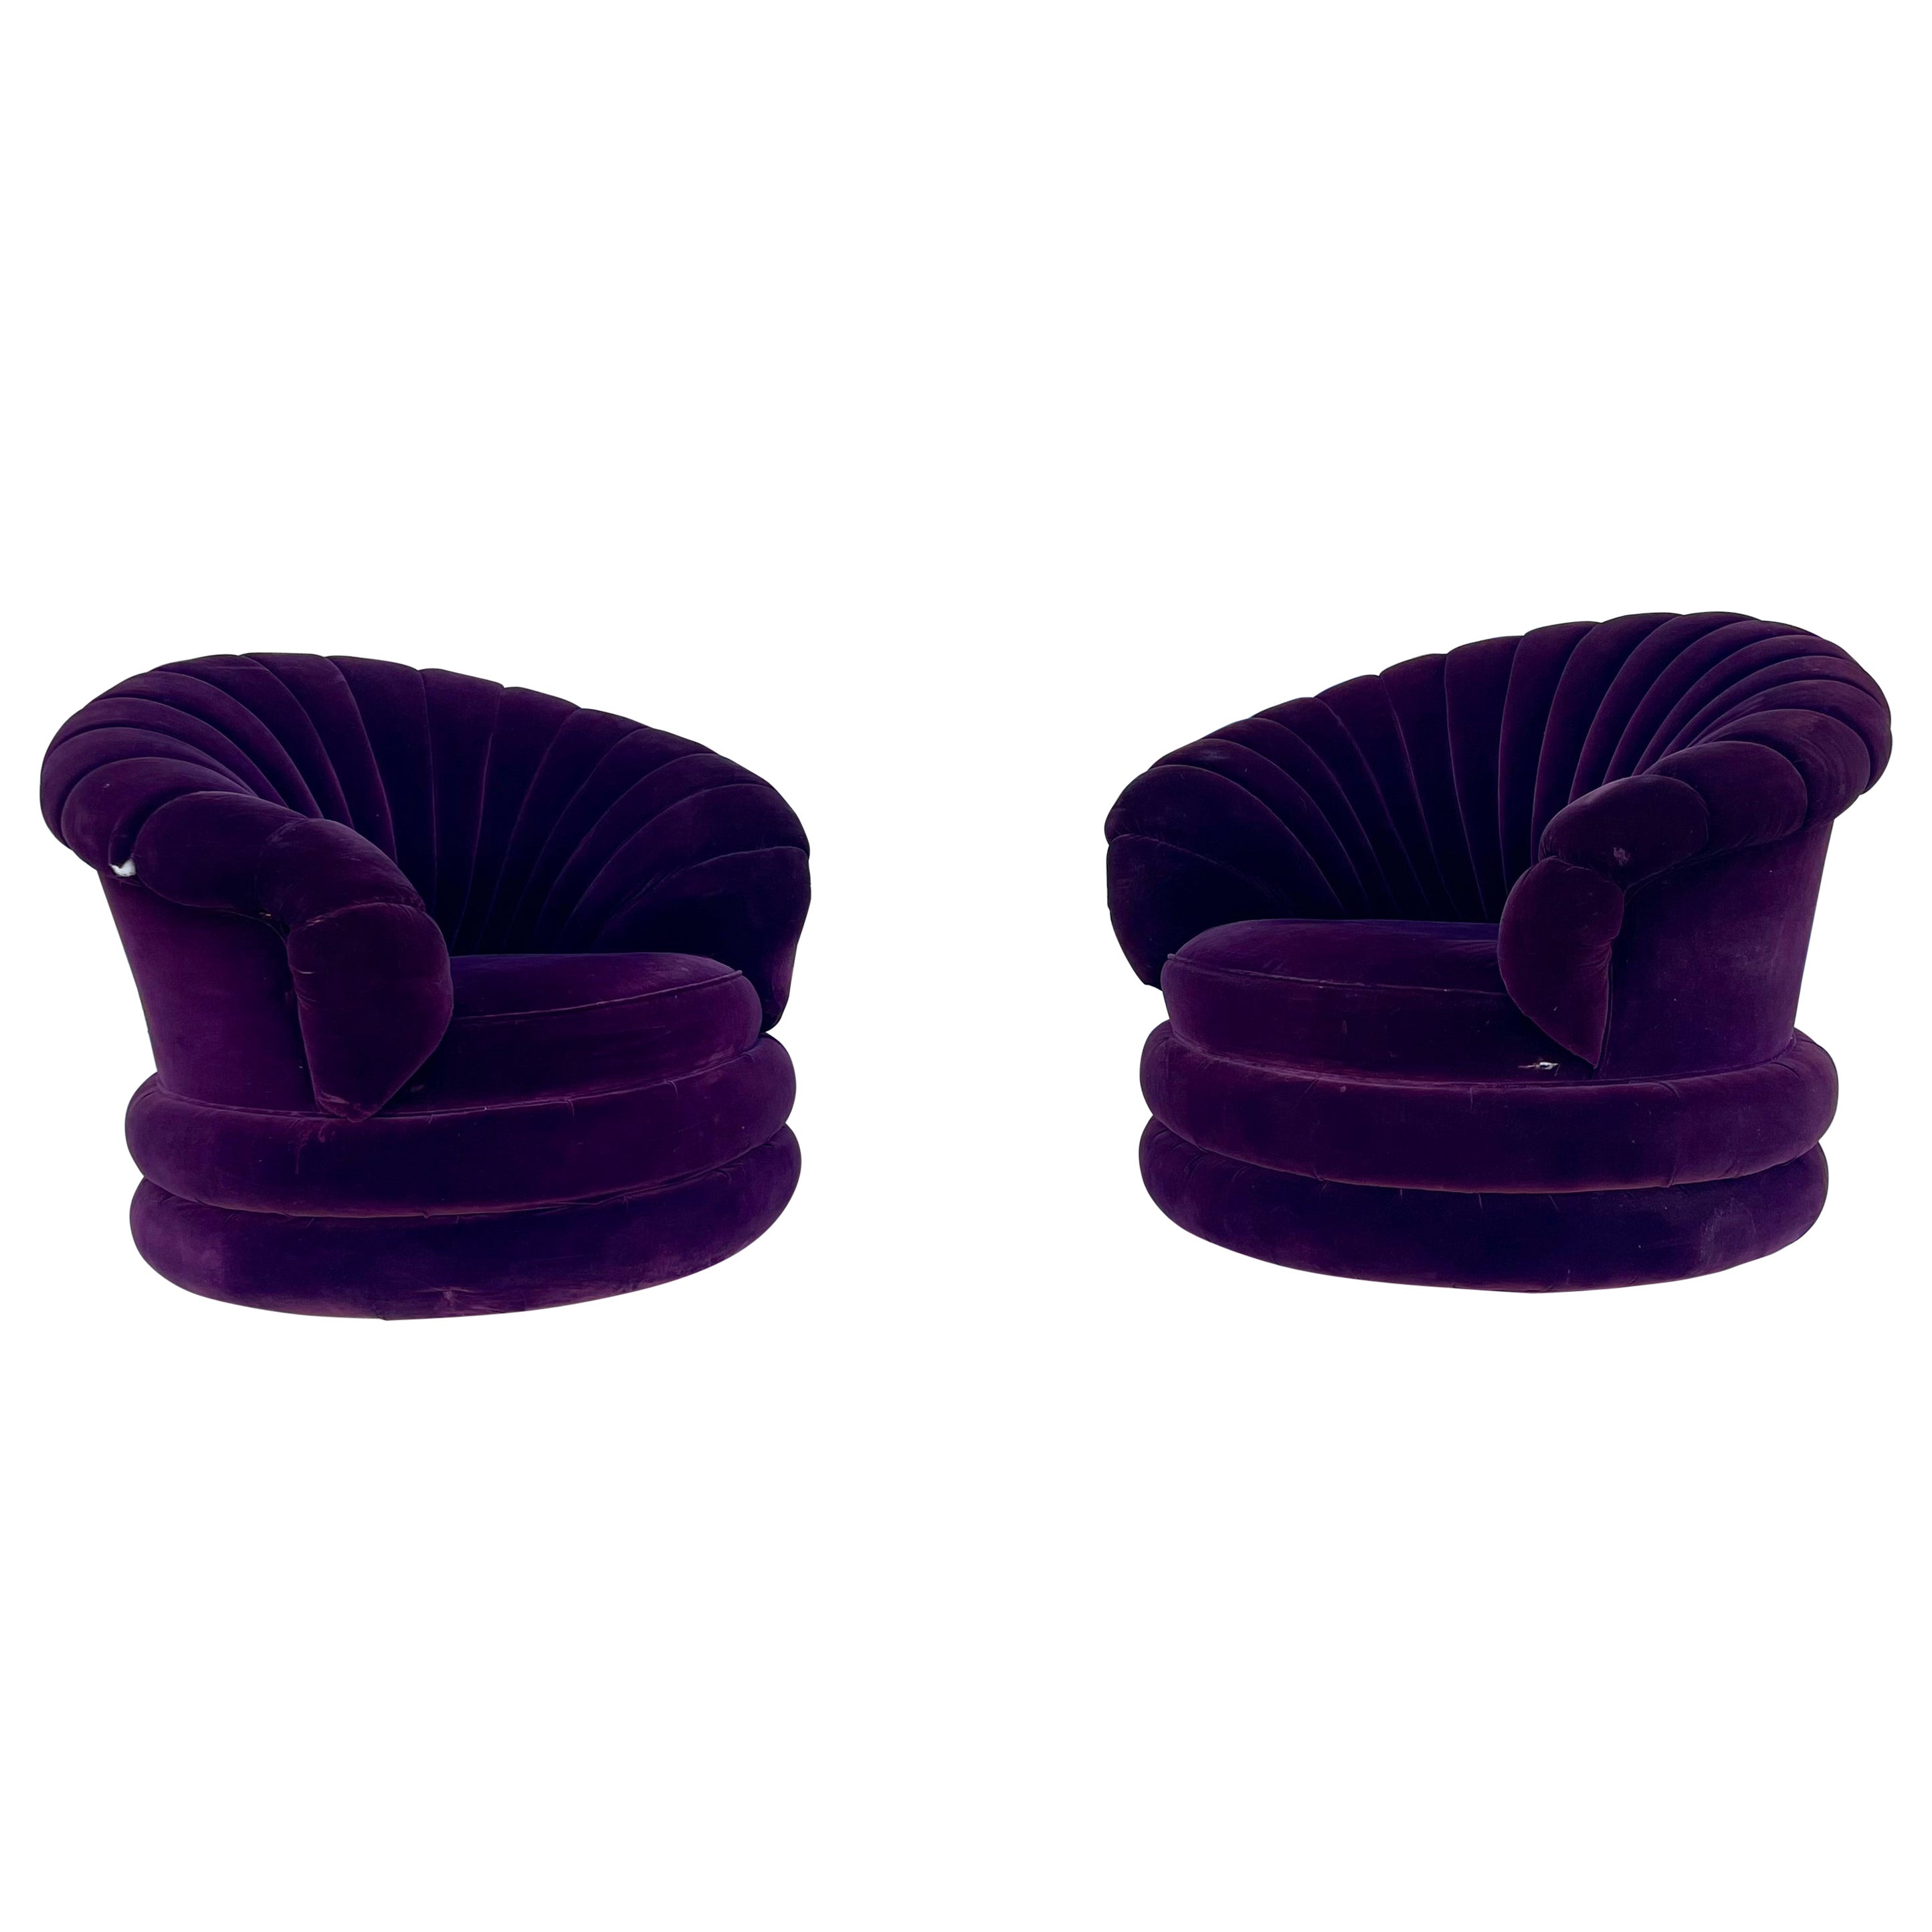 Hollywood Regency Clamshell Swivel Chairs For Sale